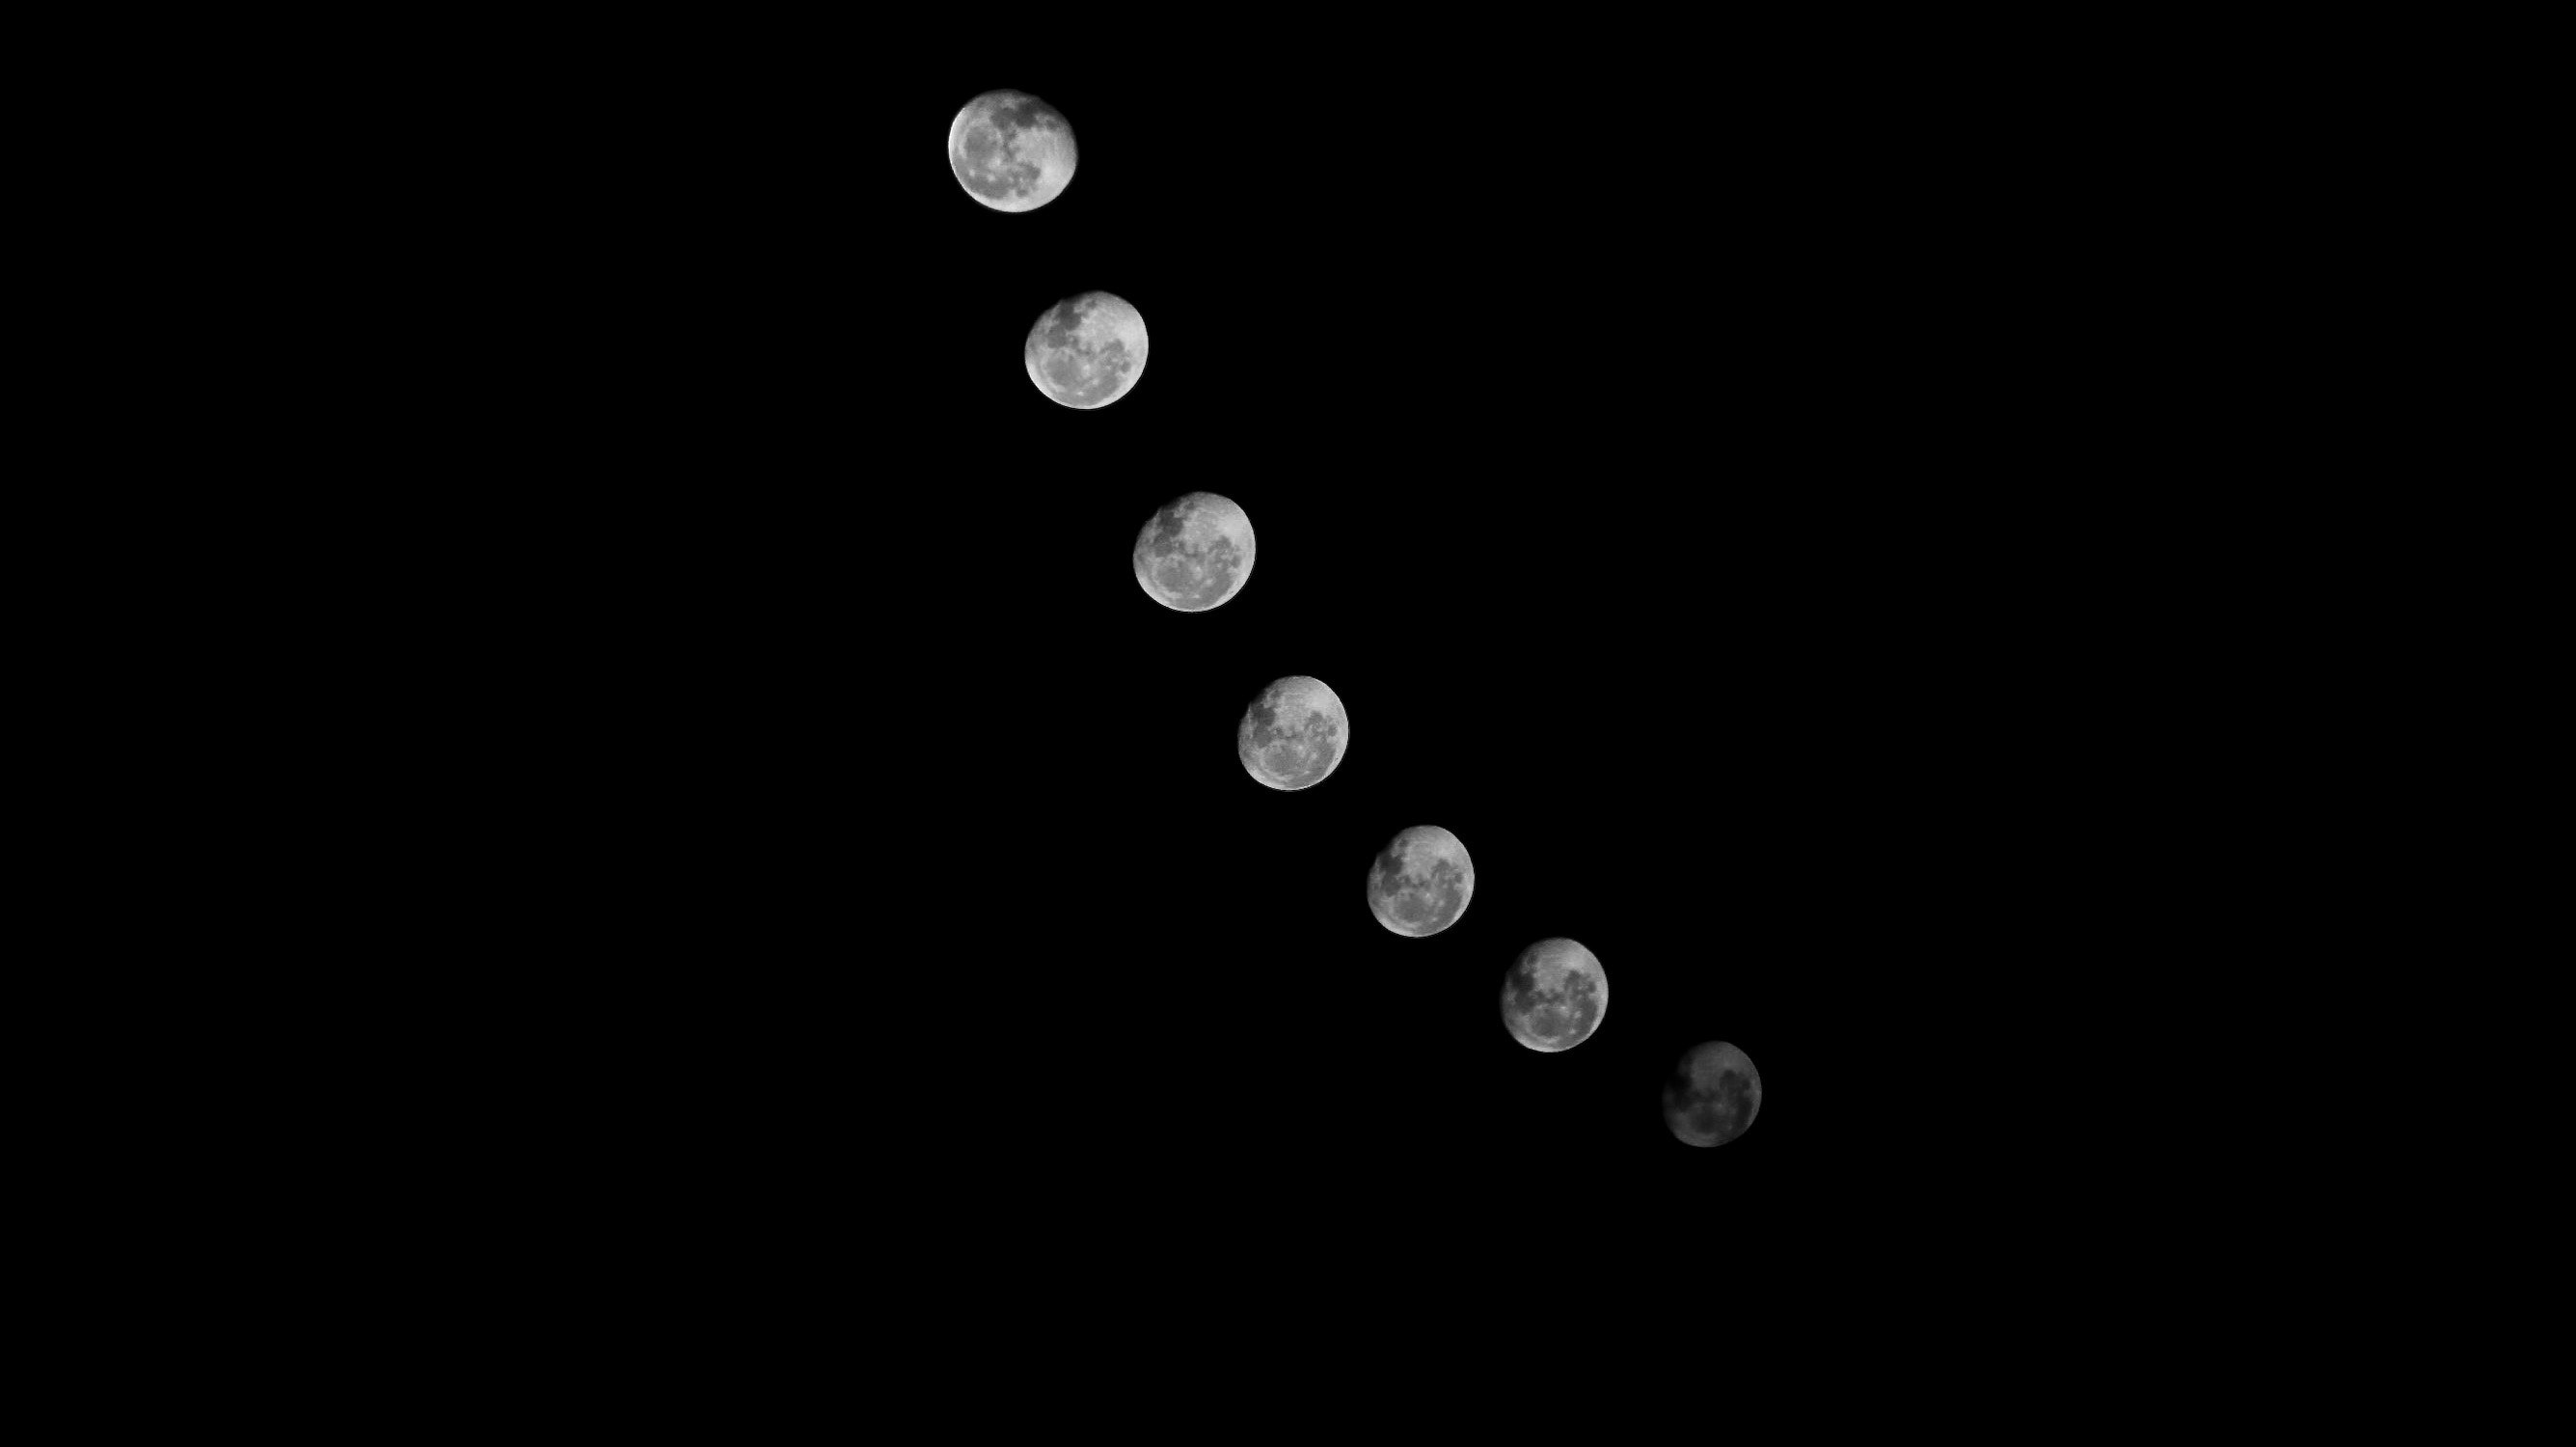 The moon in a black sky - Moon phases